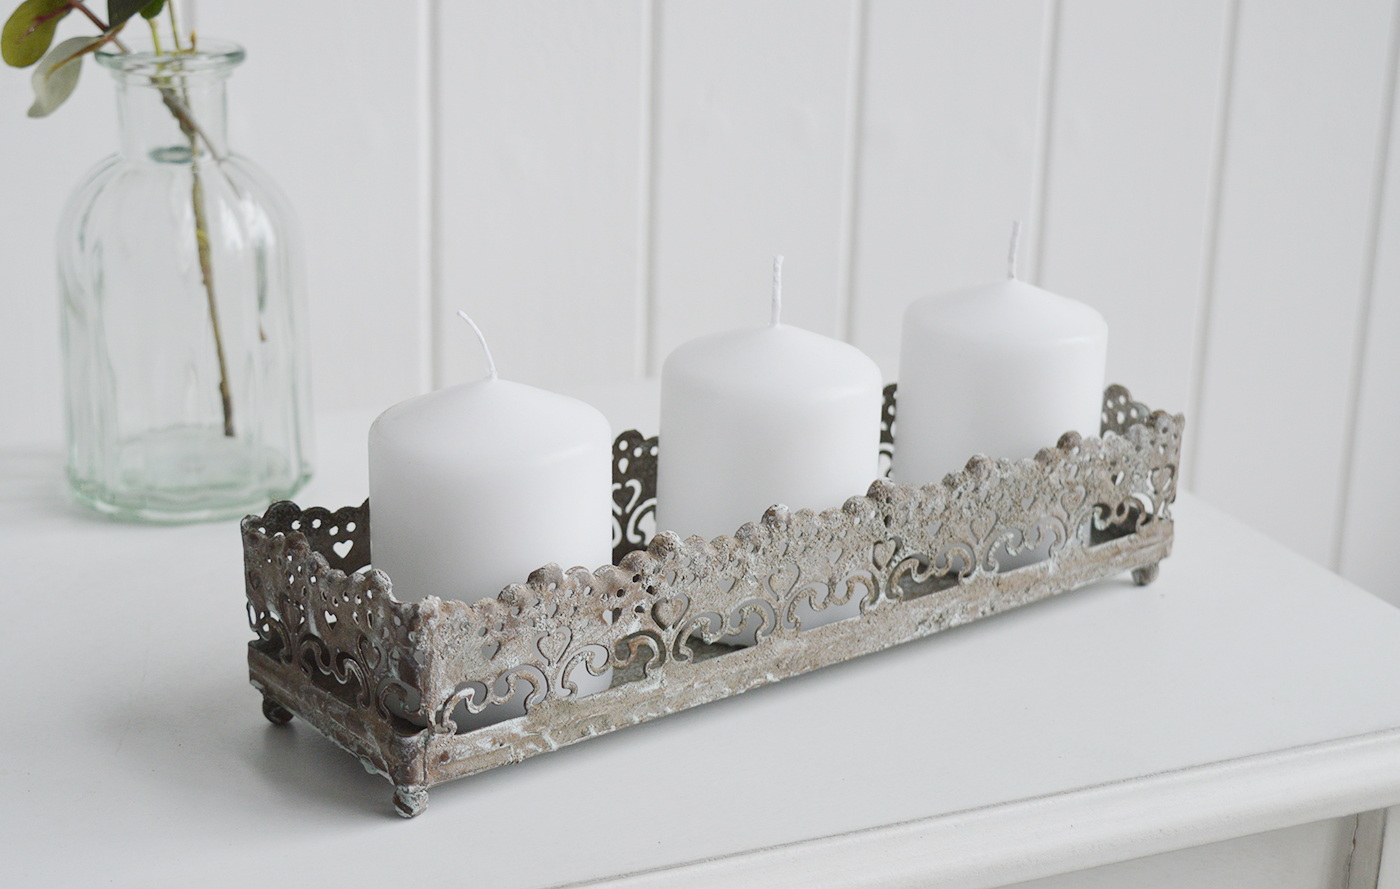 Candle holder tray in aged metal vintage style. New England style home interiors and furniture from The White Lighthouse